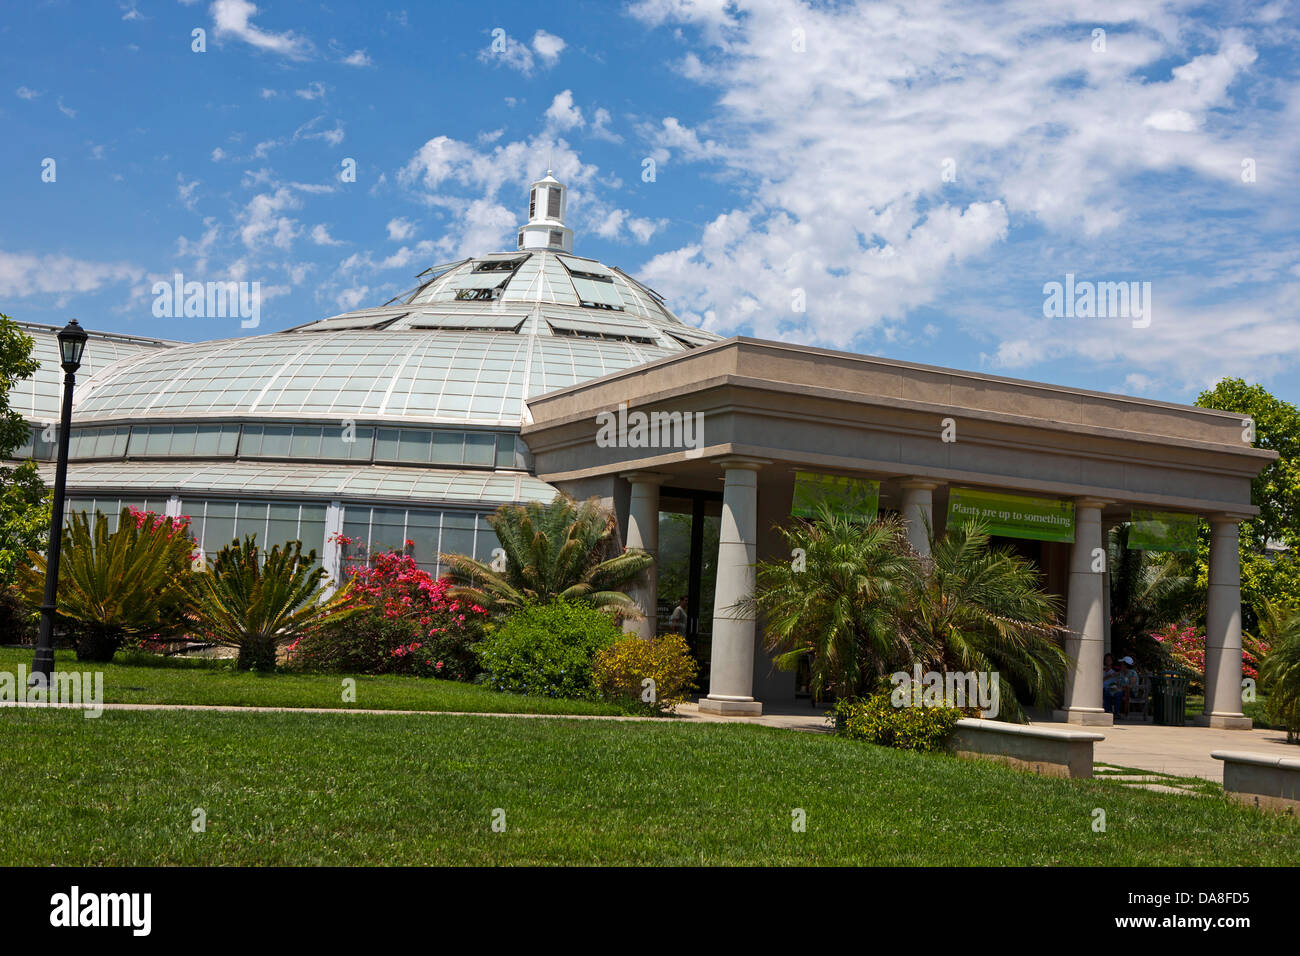 Rose Hills Foundation Conservatory for Botanical Science, The Huntington Library, Art Collection, and Botanical Gardens San Marino, California, United States of America Stock Photo